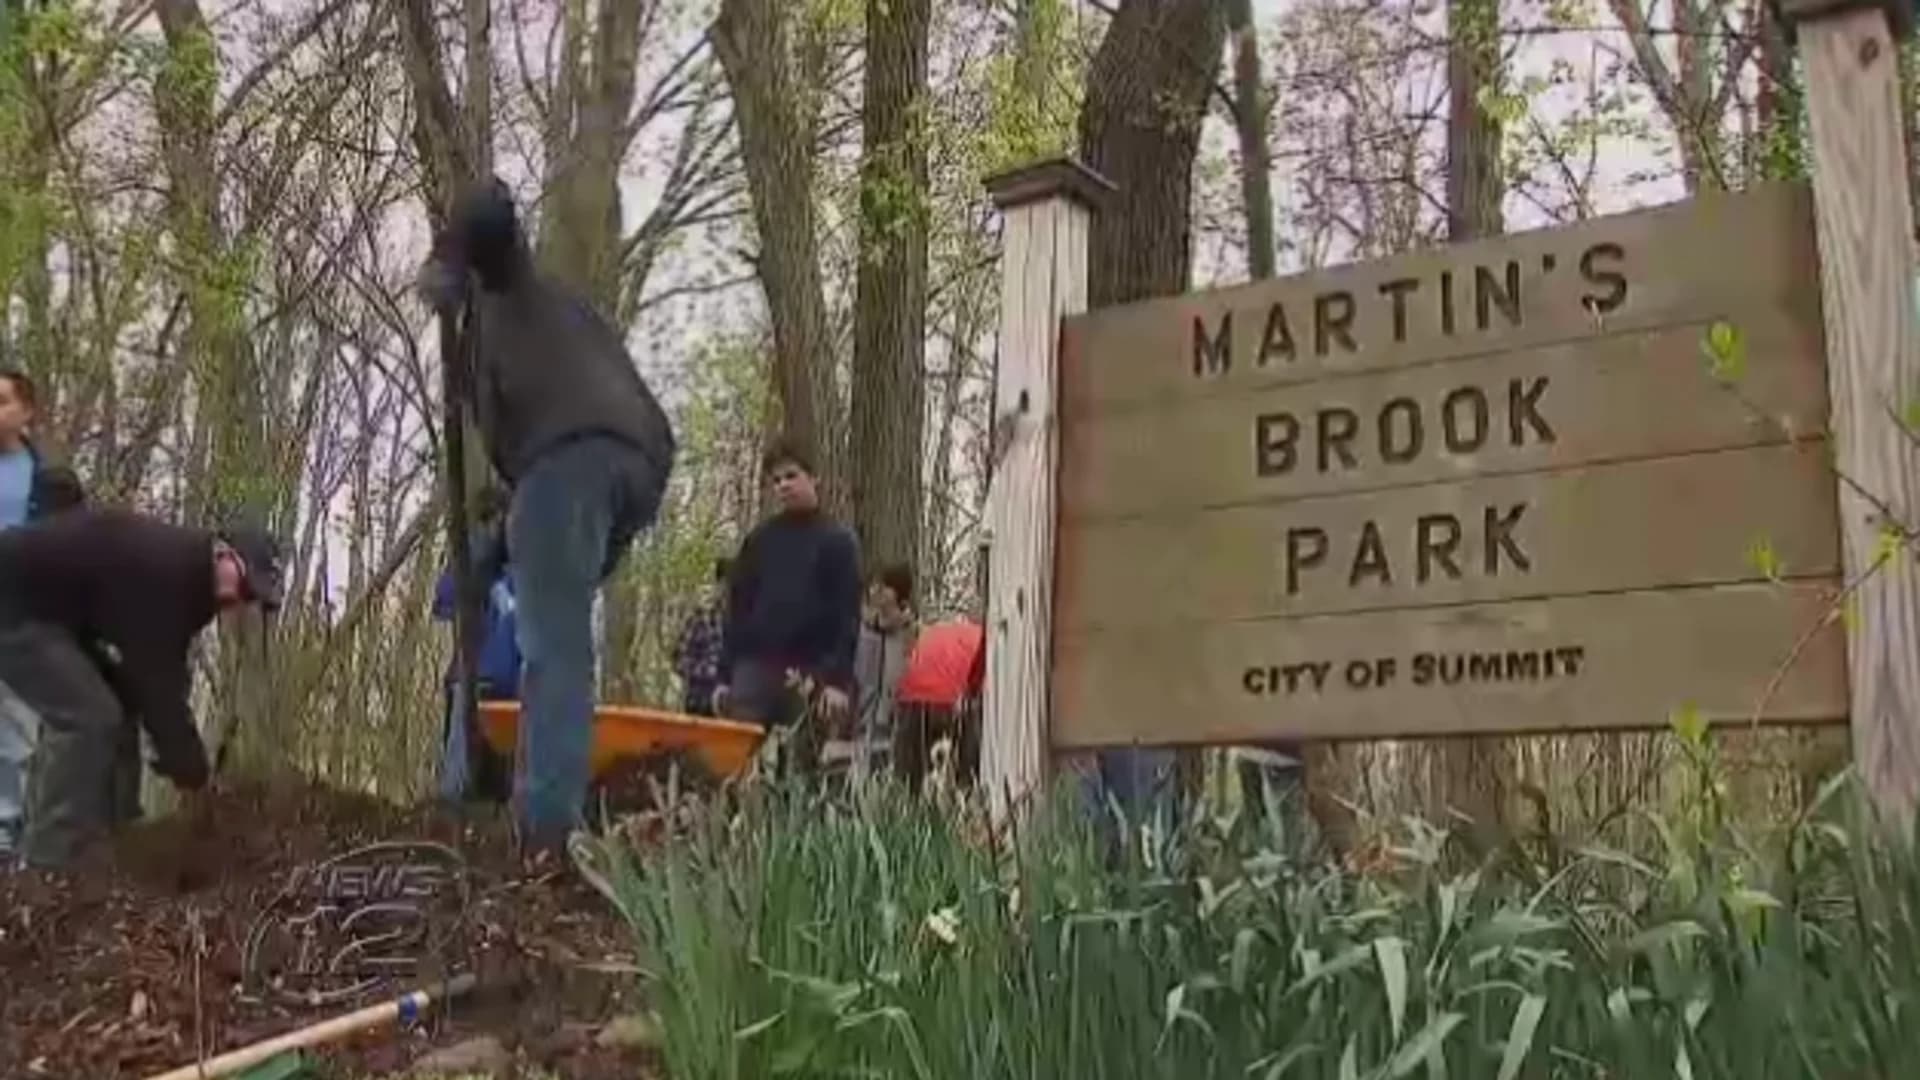 Boy Scouts clean up Martin's Brook Park for Earth Day